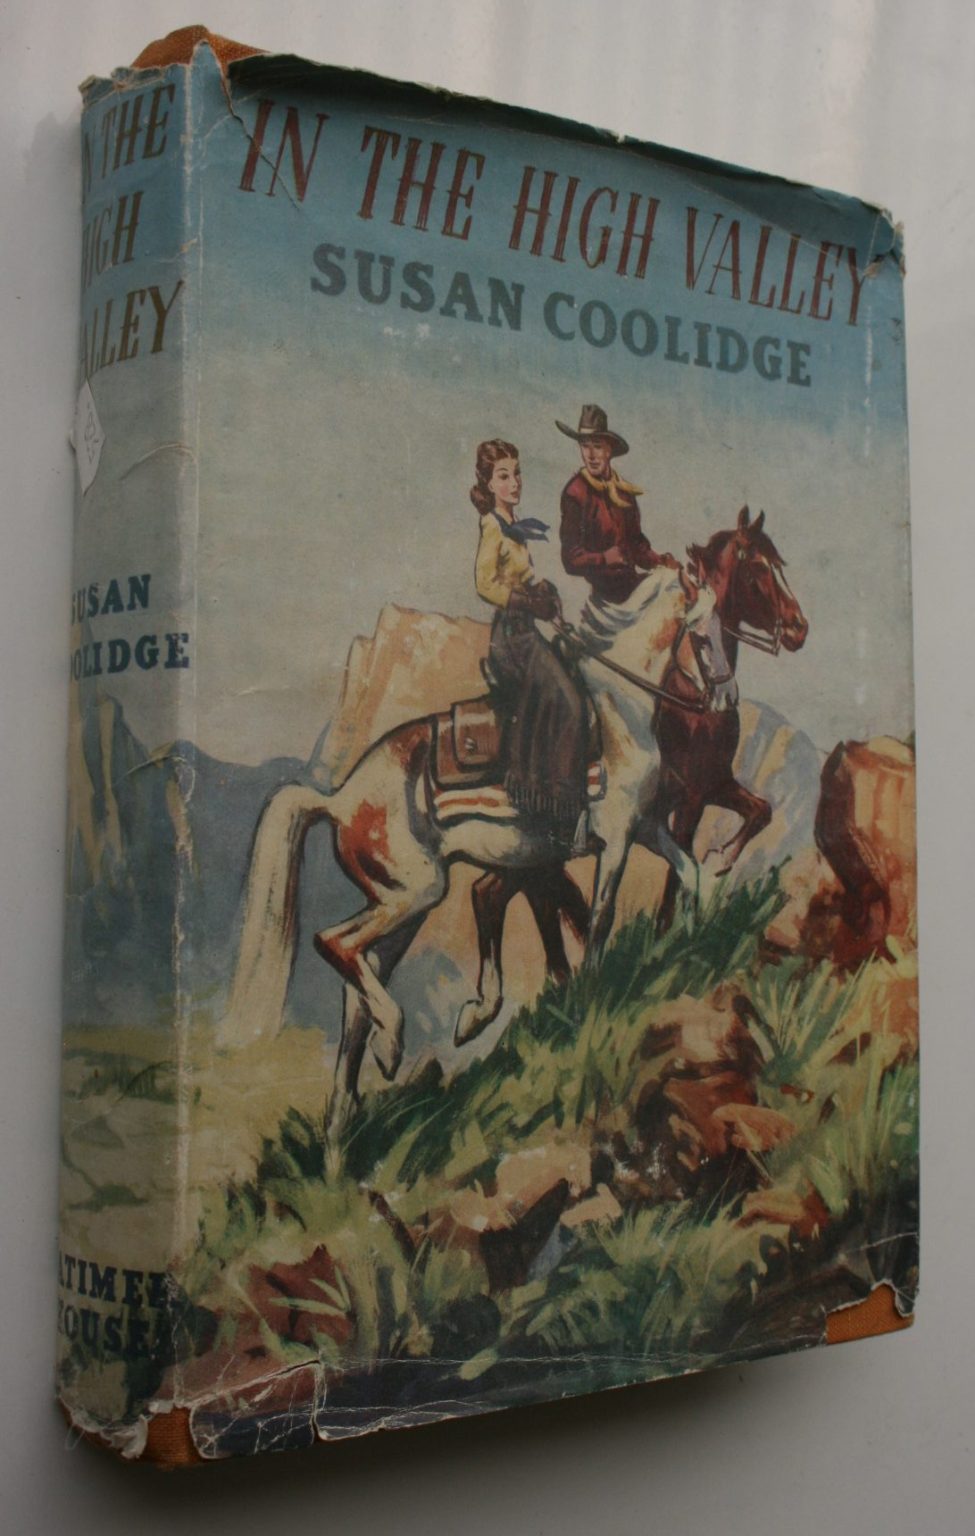 In The High Valley by Susan Coolidge. 1949.